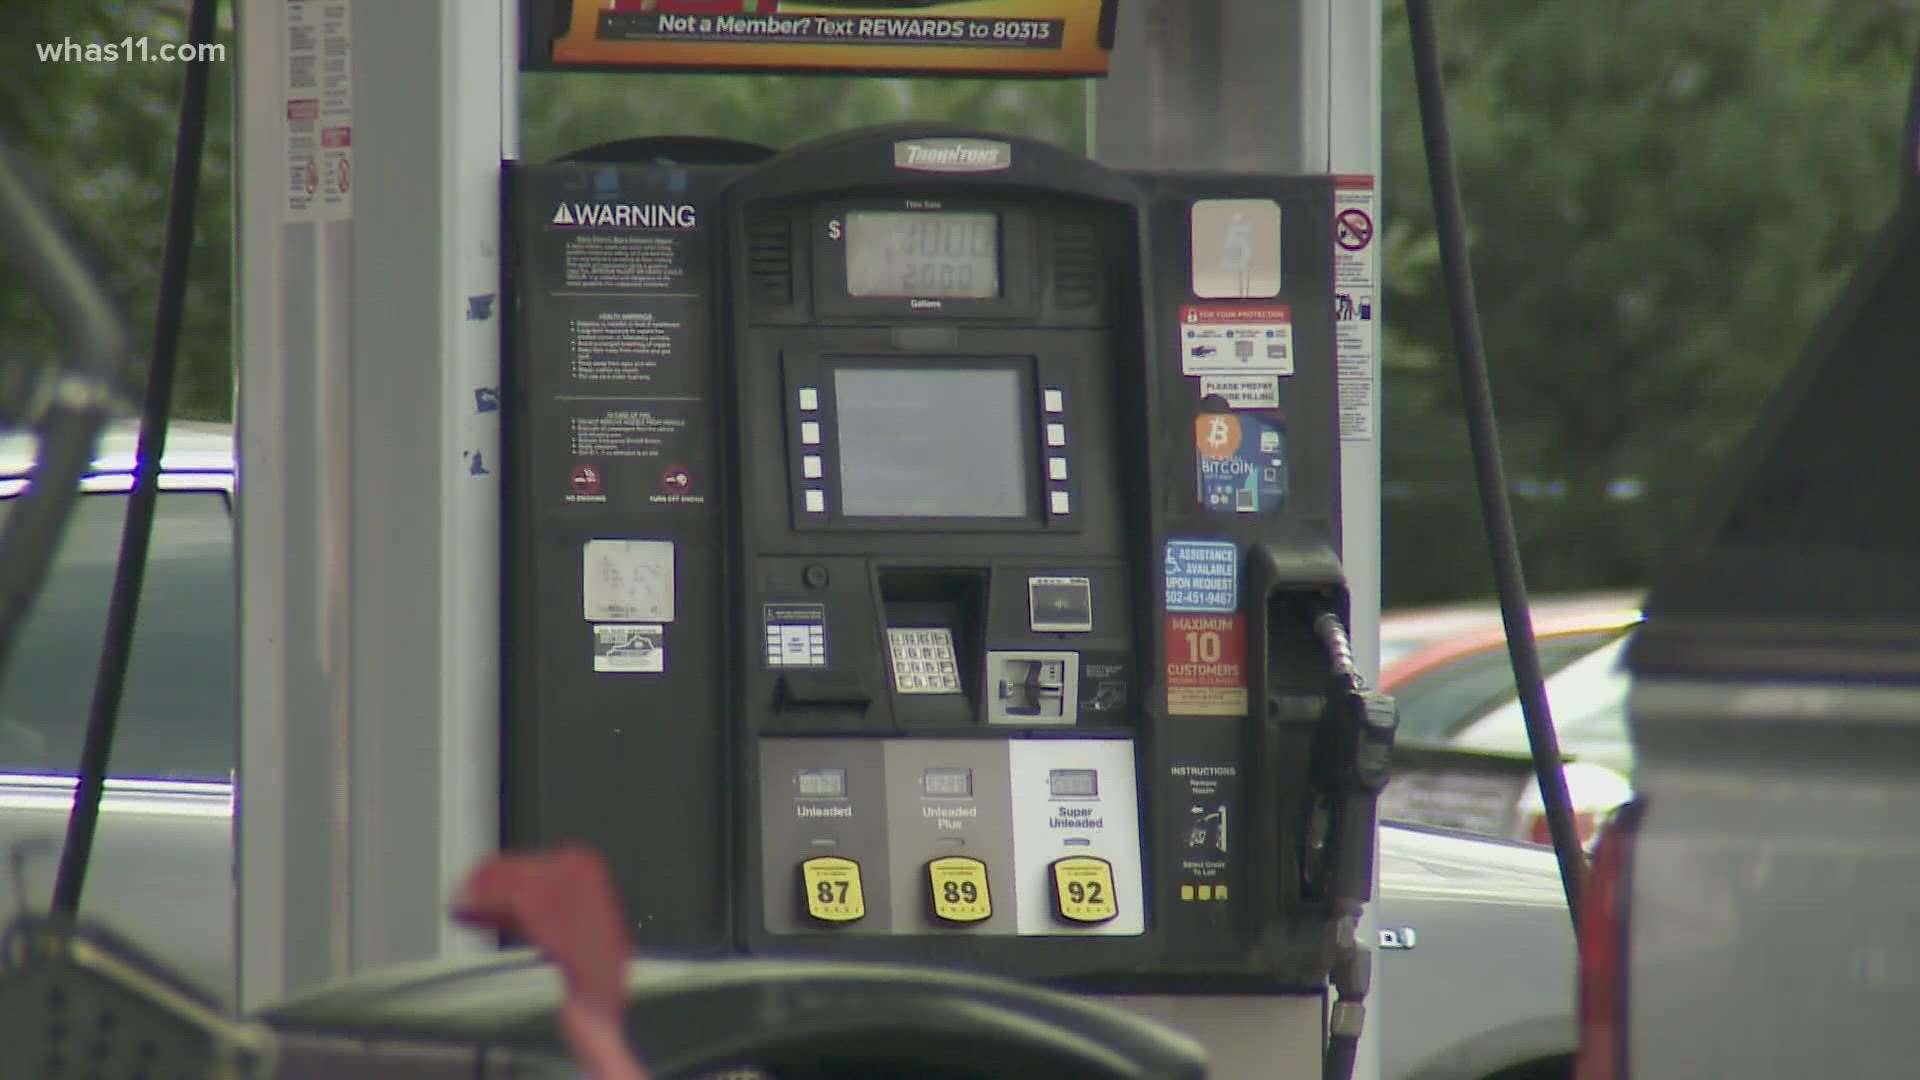 Consumers are experiencing pain at the pump and are looking for ways to cut costs or driving altogether.